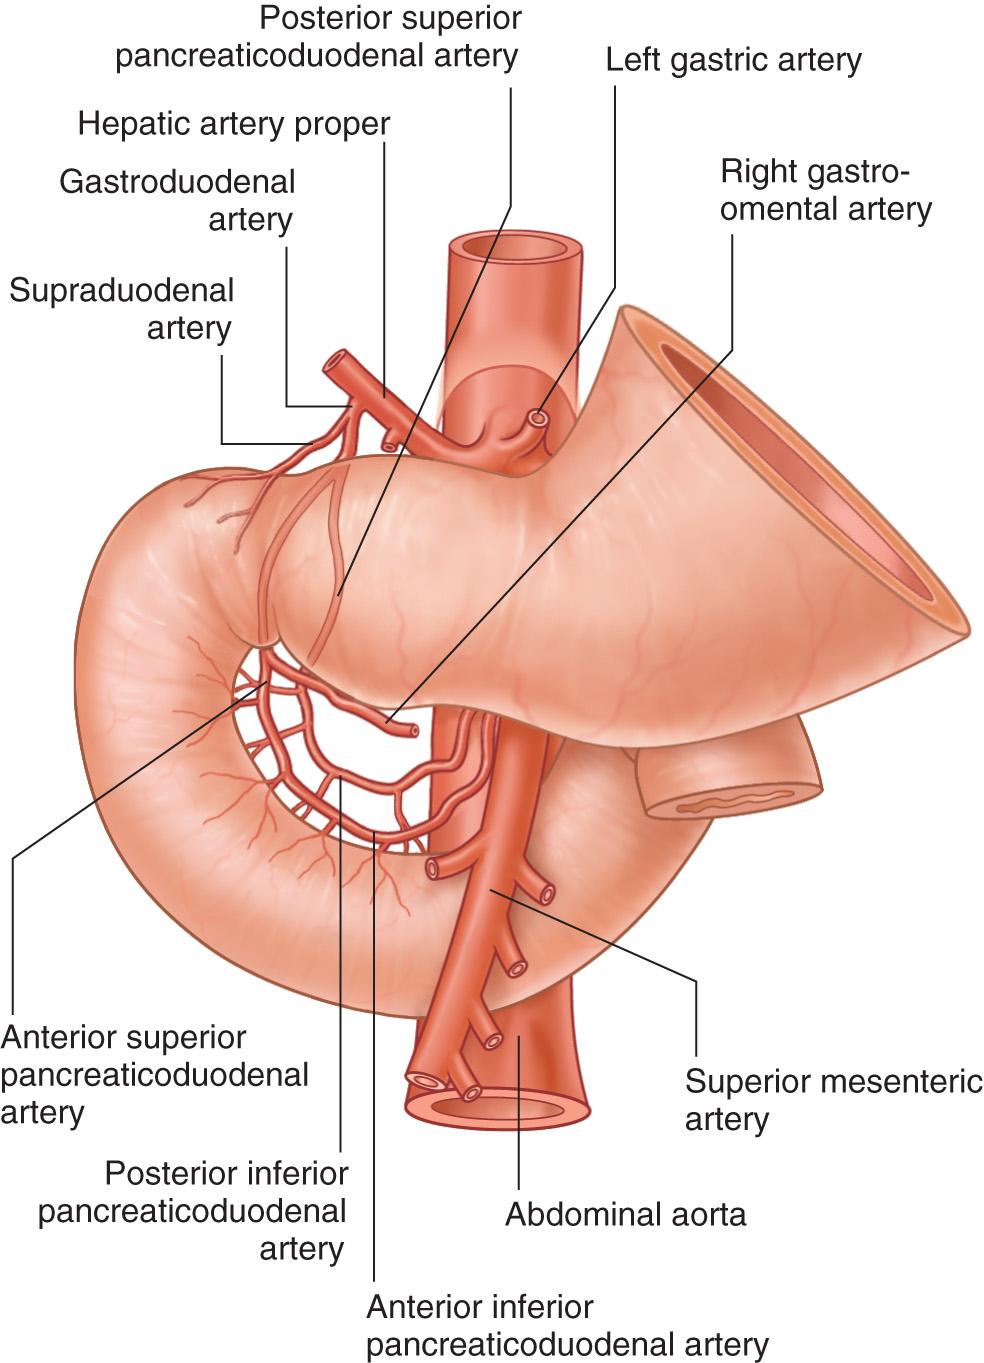 FIGURE 71.5, Arterial supply to the duodenum.